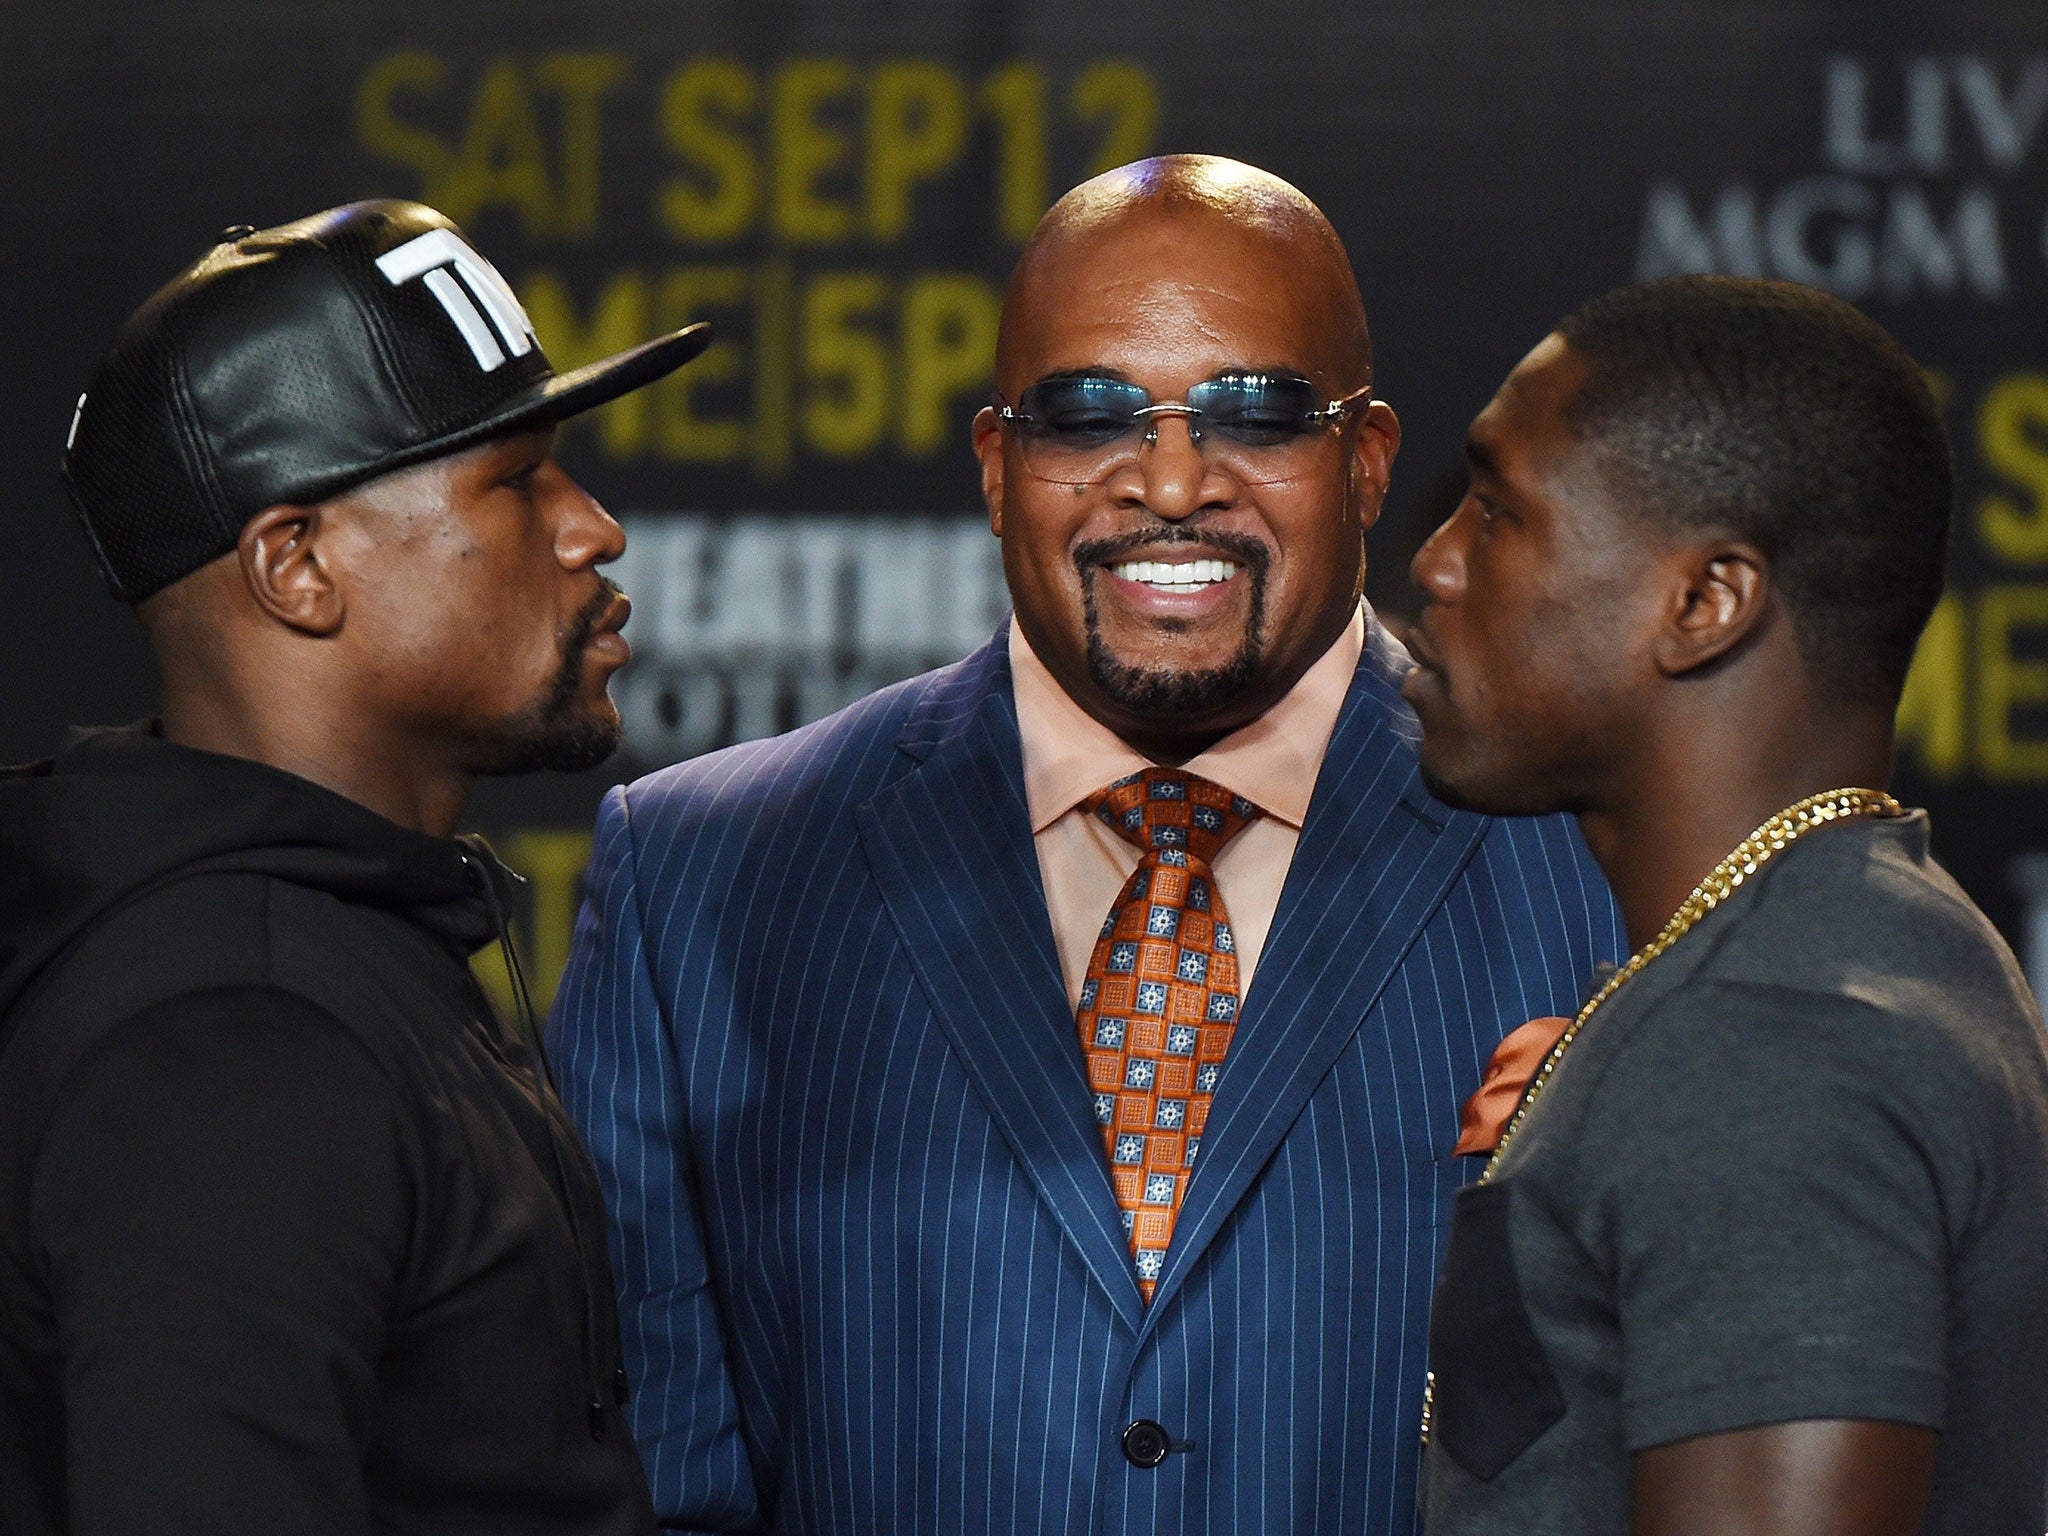 Floyd Mayweather faces off with Andre Berto